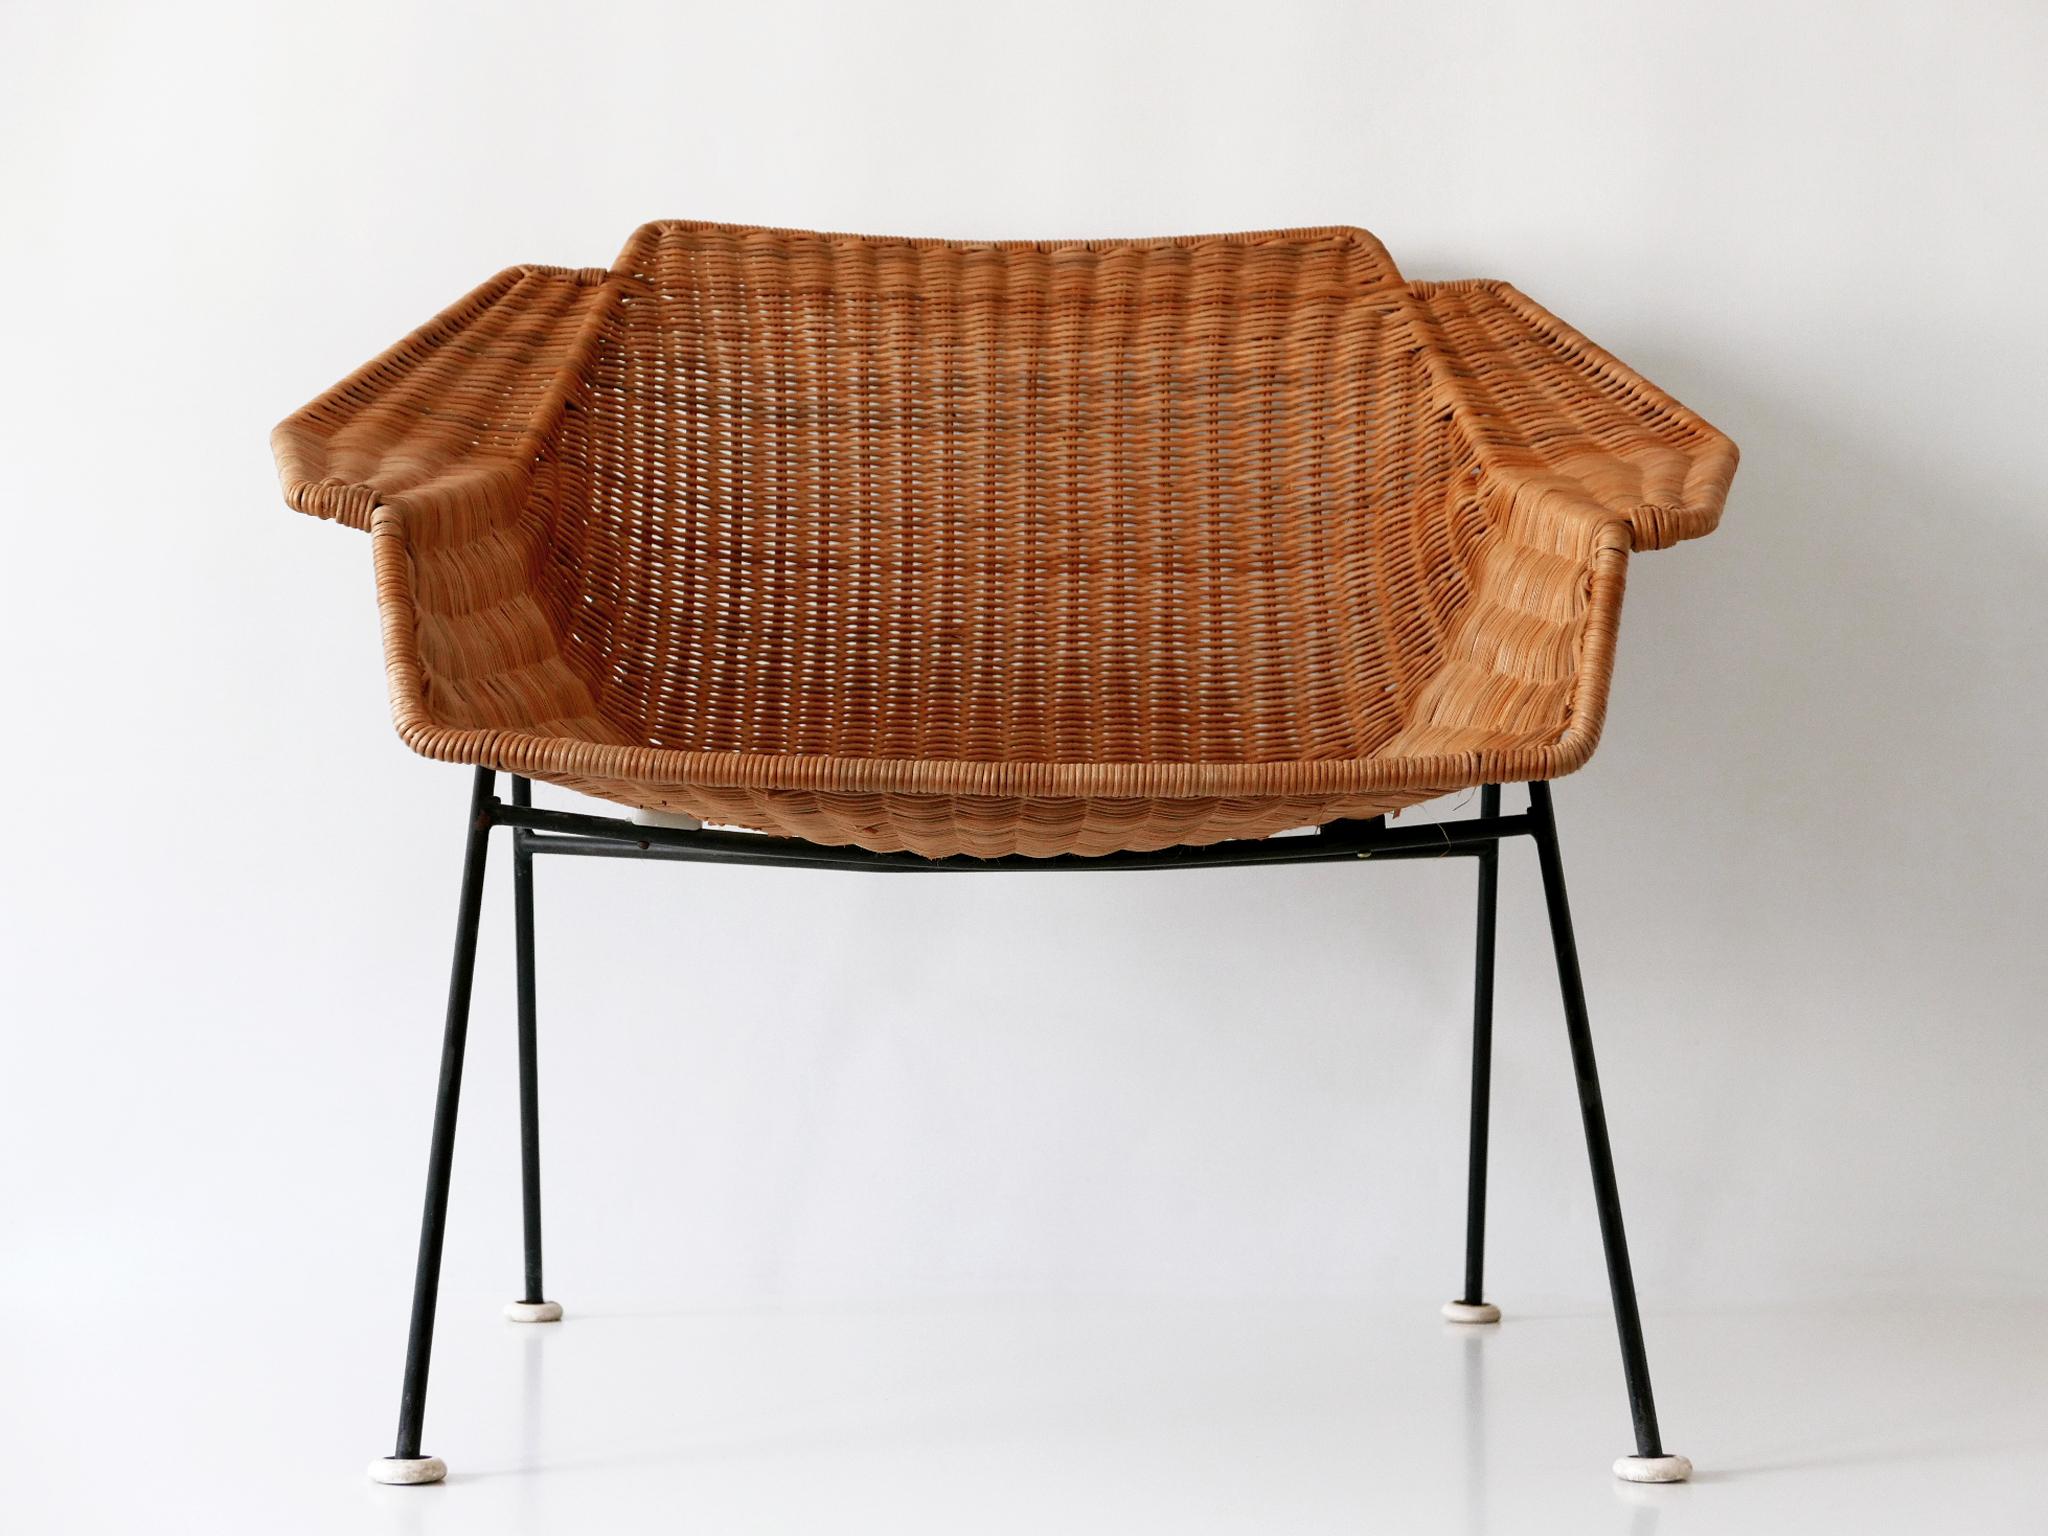 Exceptional Mid-Century Modern Wicker Lounge Chair or Armchair 1950s Sweden For Sale 3